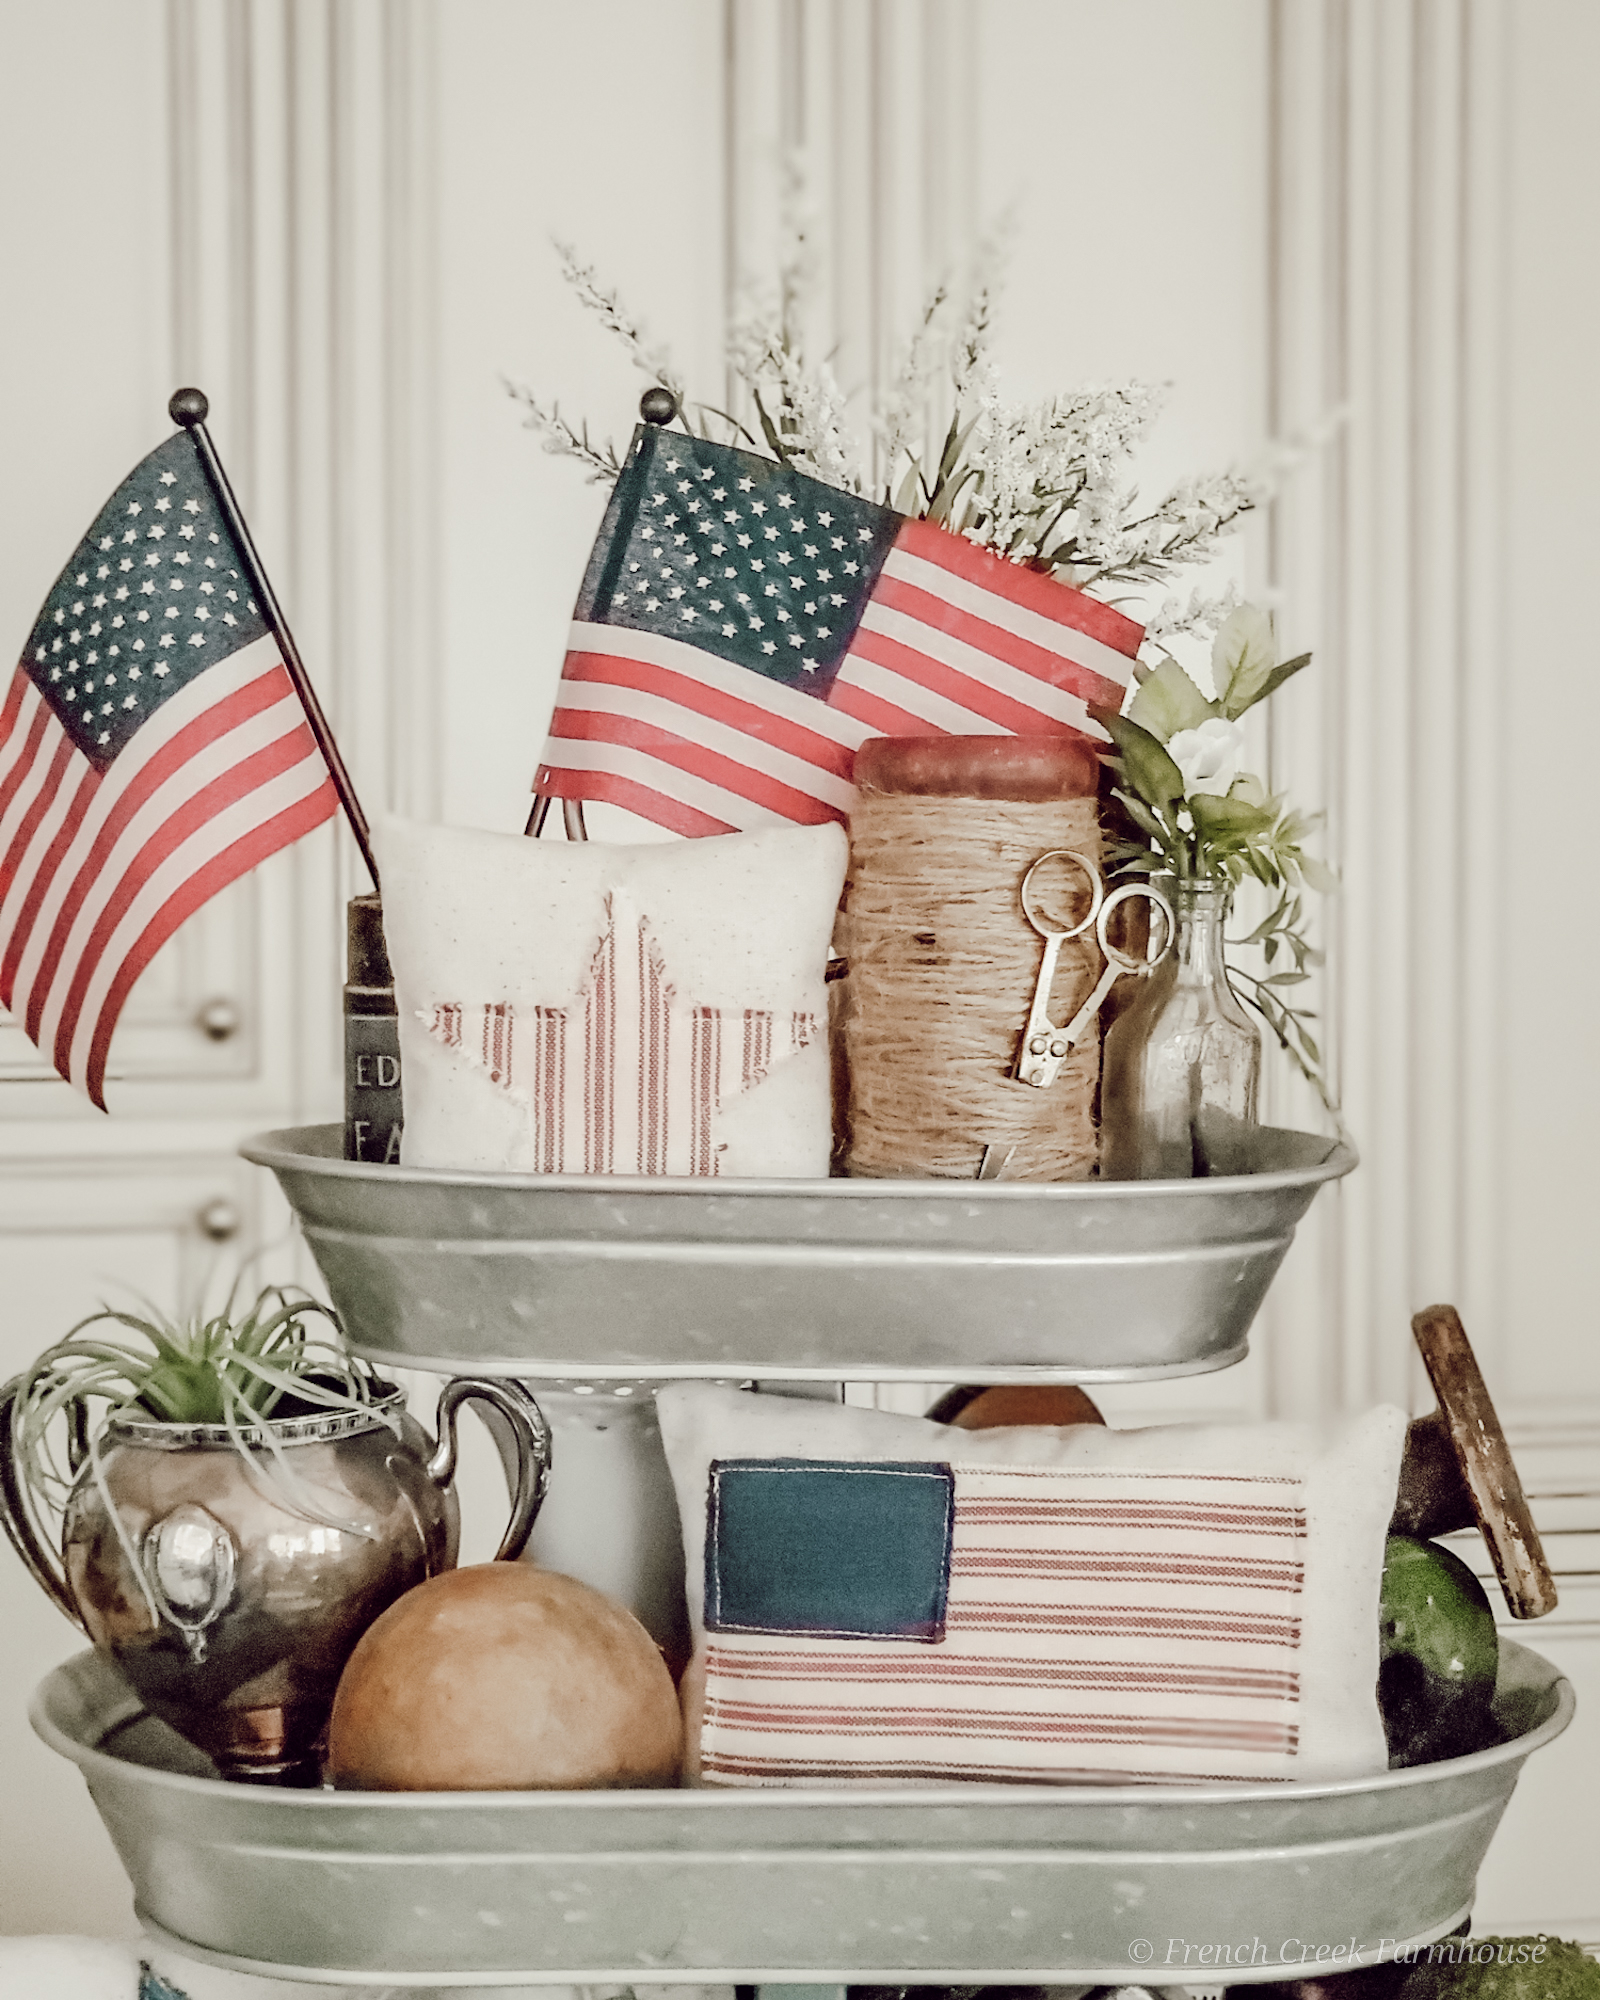 Vintage and American flag decor in a tiered tray